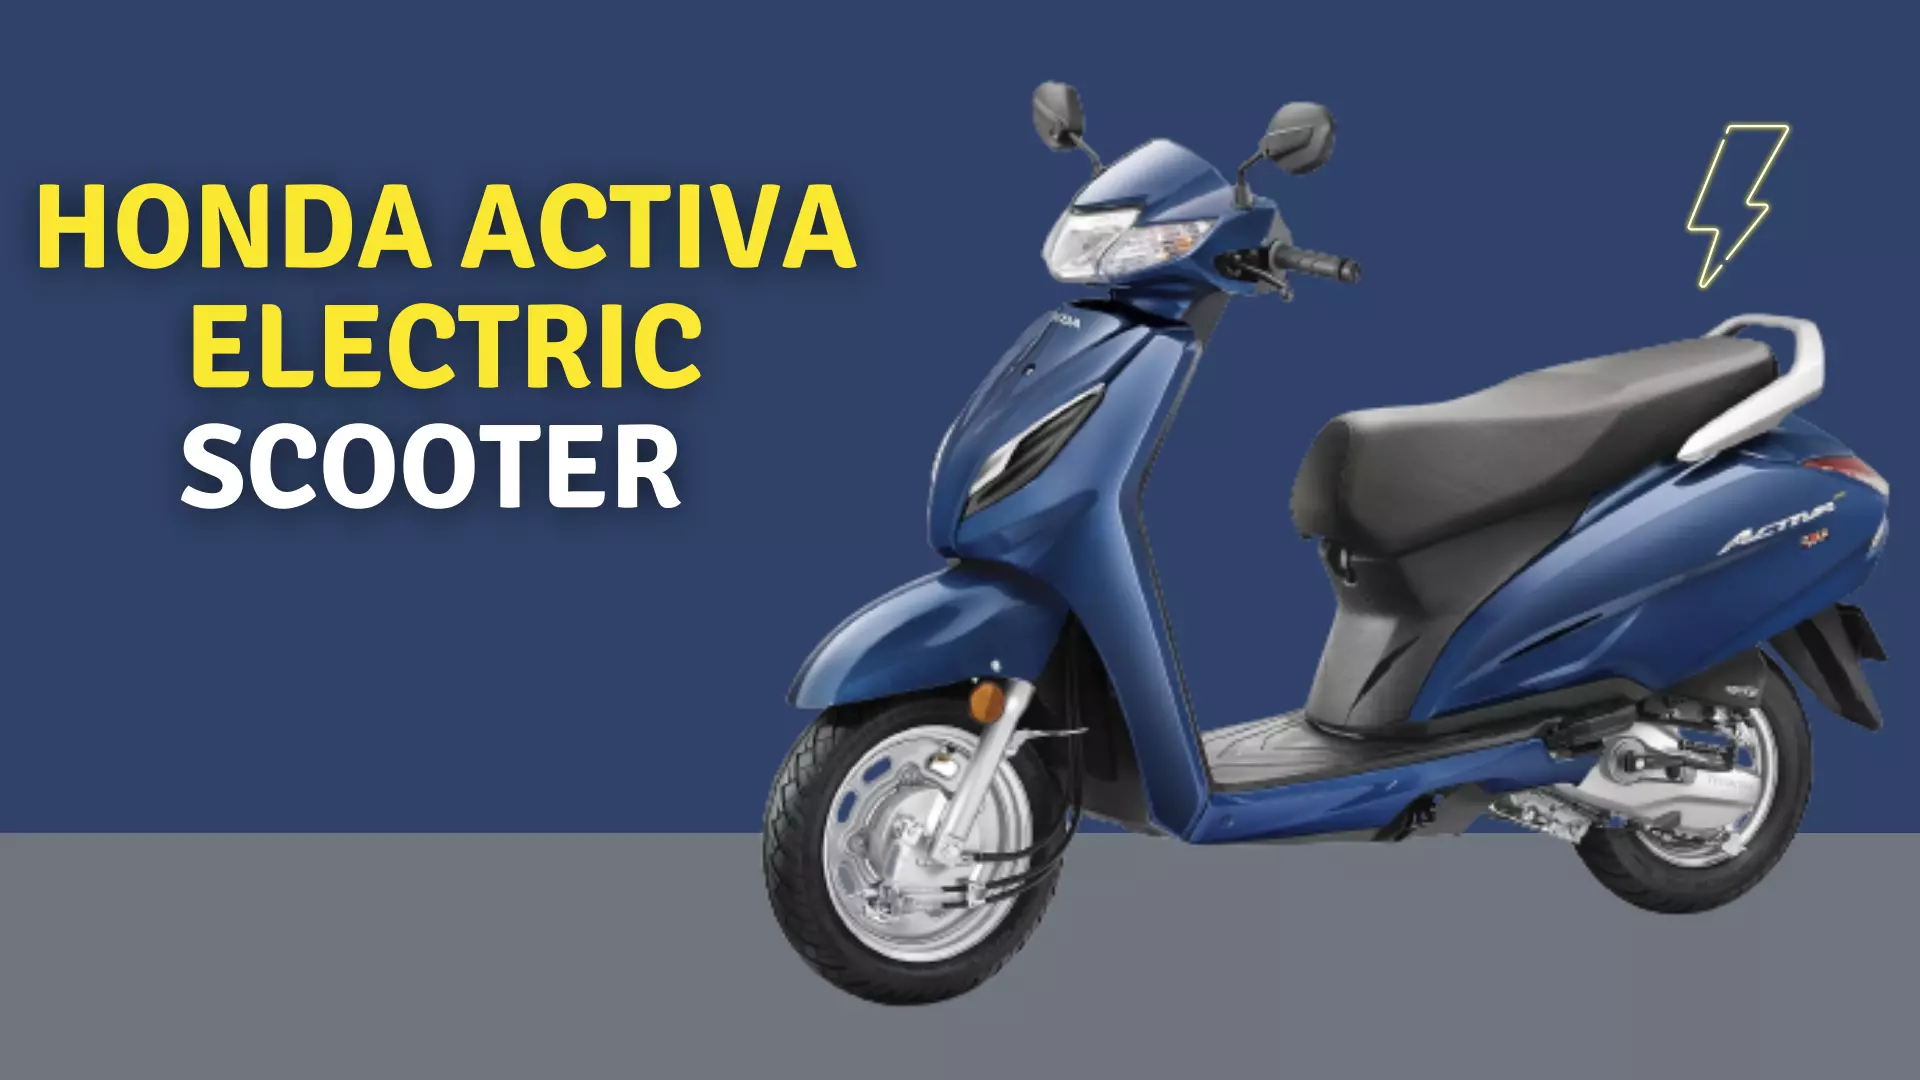 https://e-vehicleinfo.com/honda-activa-electric-scooter-price-and-specifications/